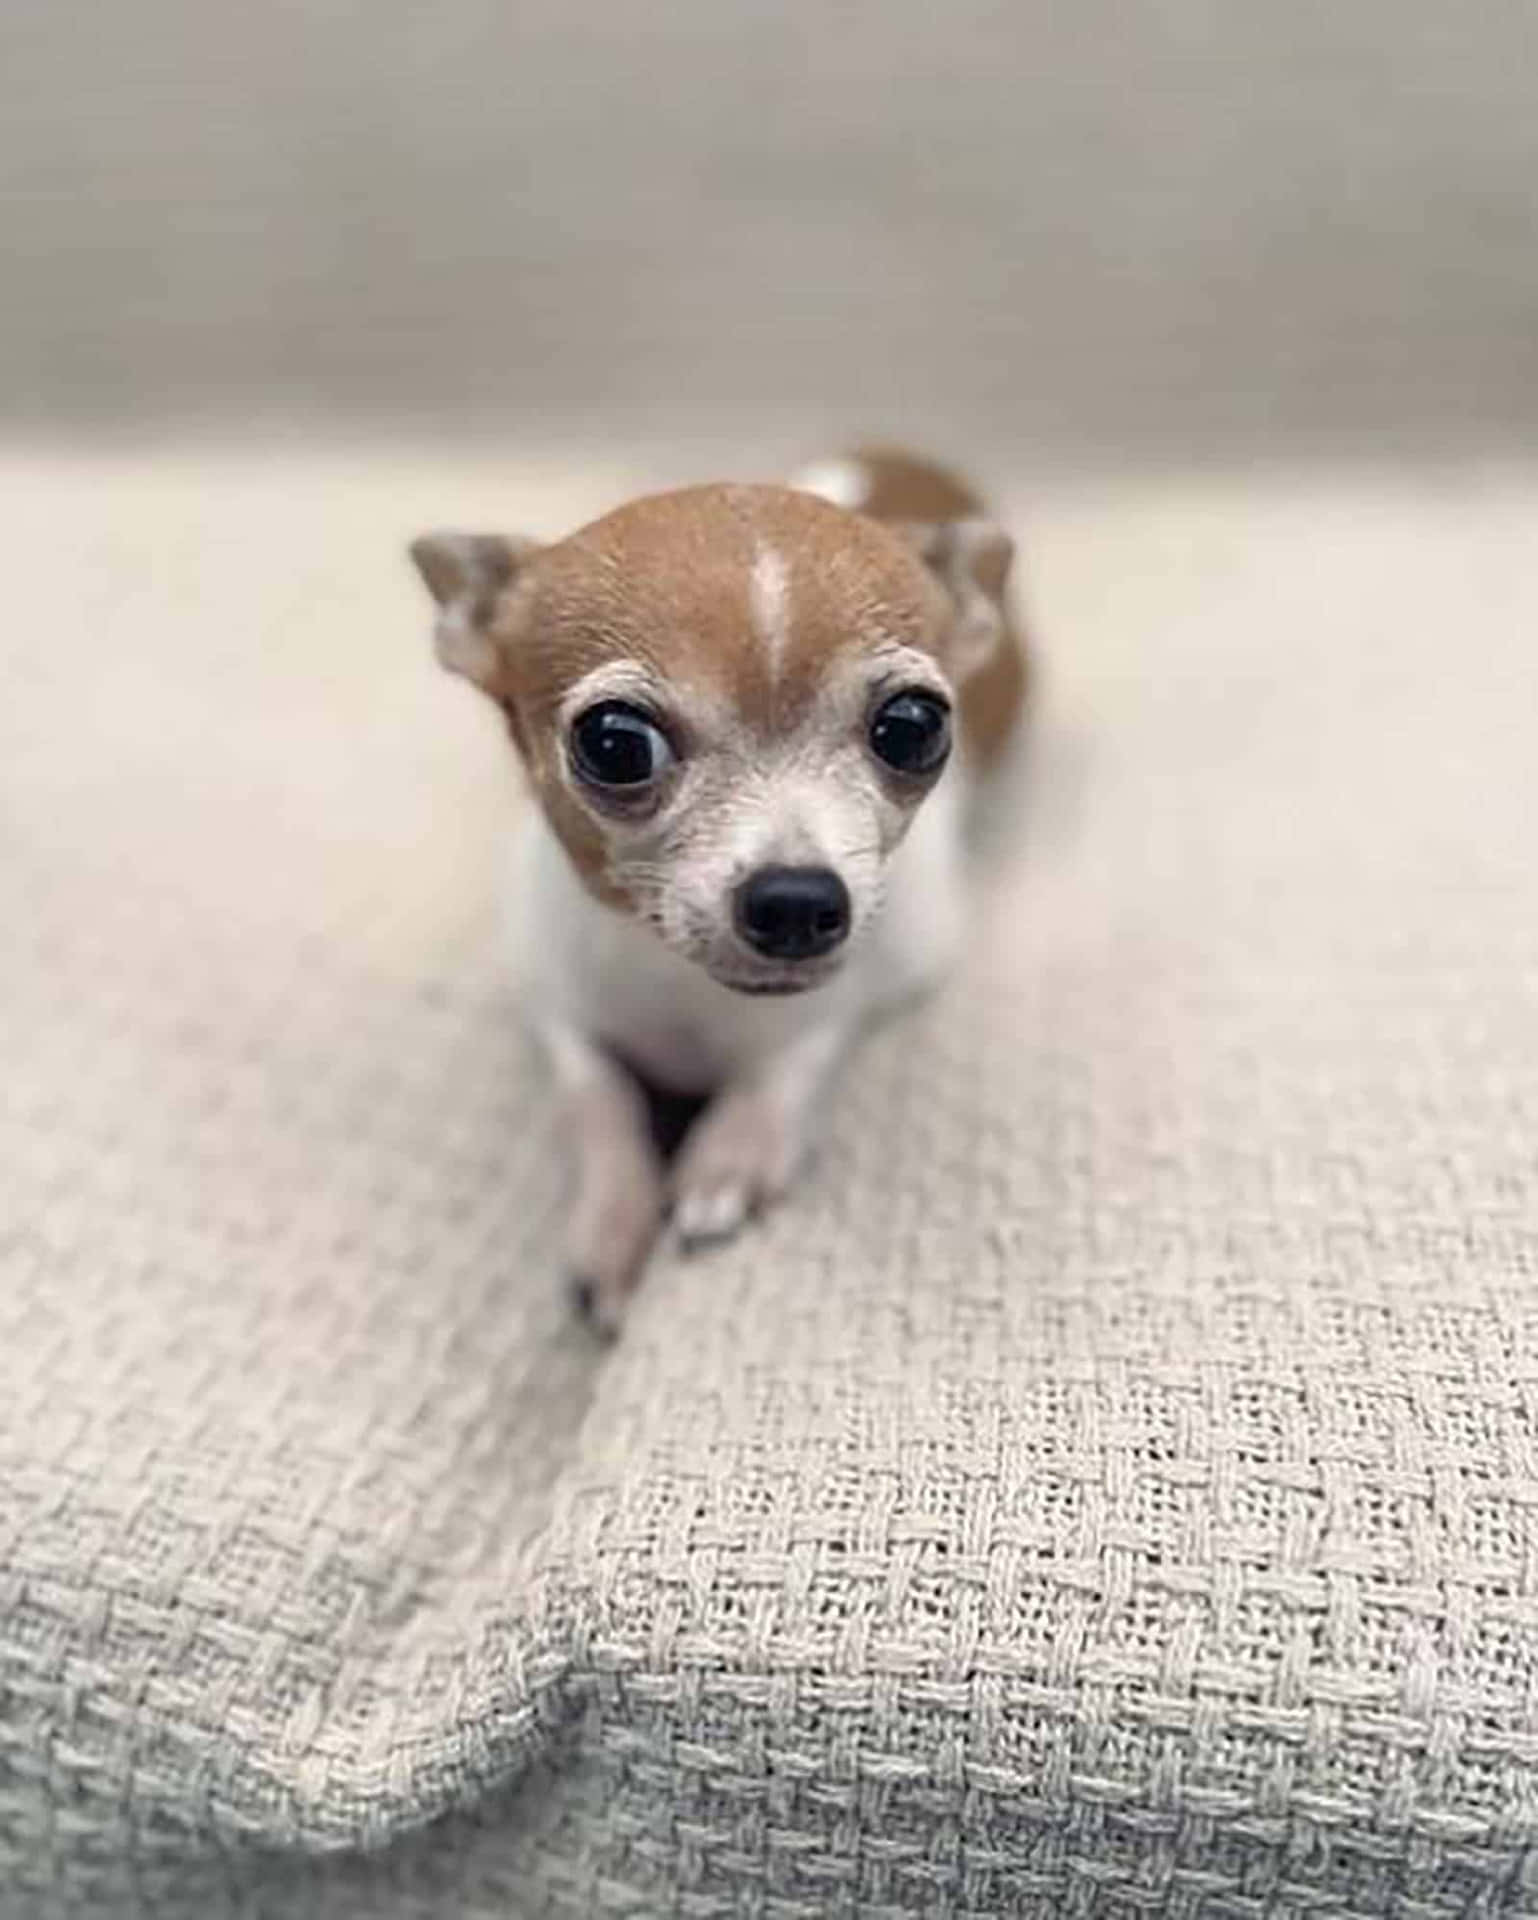 Adorable Teacup Chihuahua Sitting and Tilting Its Head